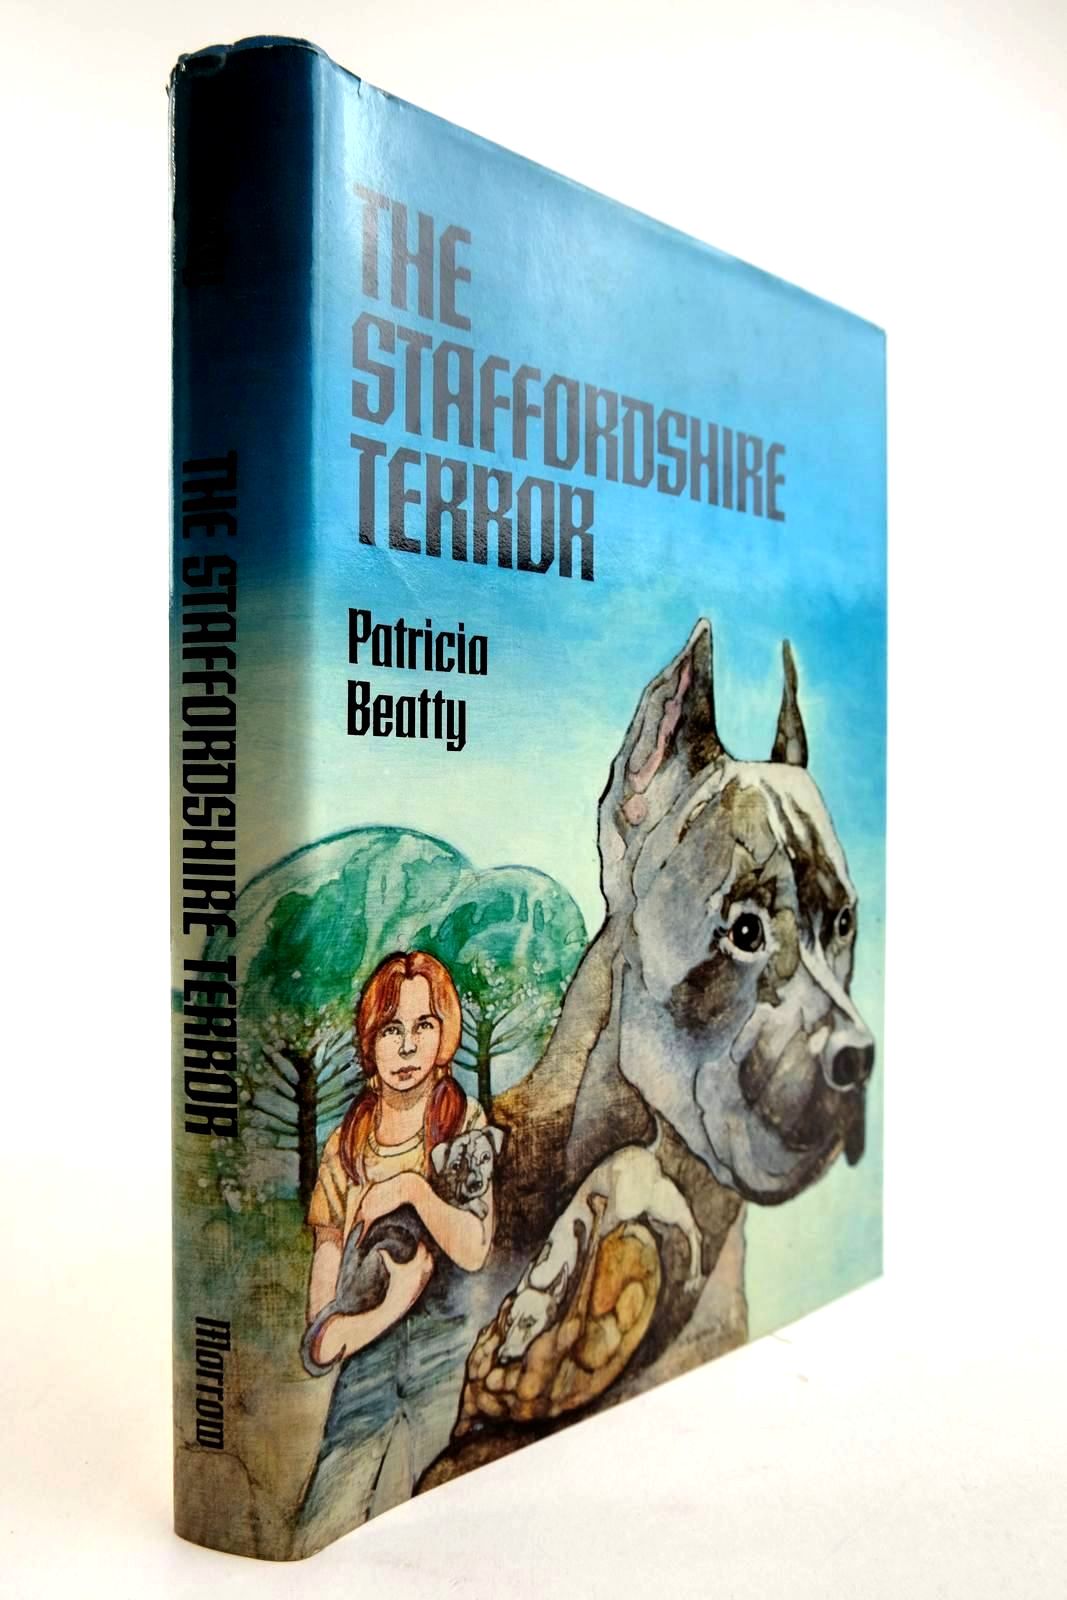 Photo of THE STAFFORDSHIRE TERROR written by Beatty, Patricia published by William Morrow & Company (STOCK CODE: 2134298)  for sale by Stella & Rose's Books